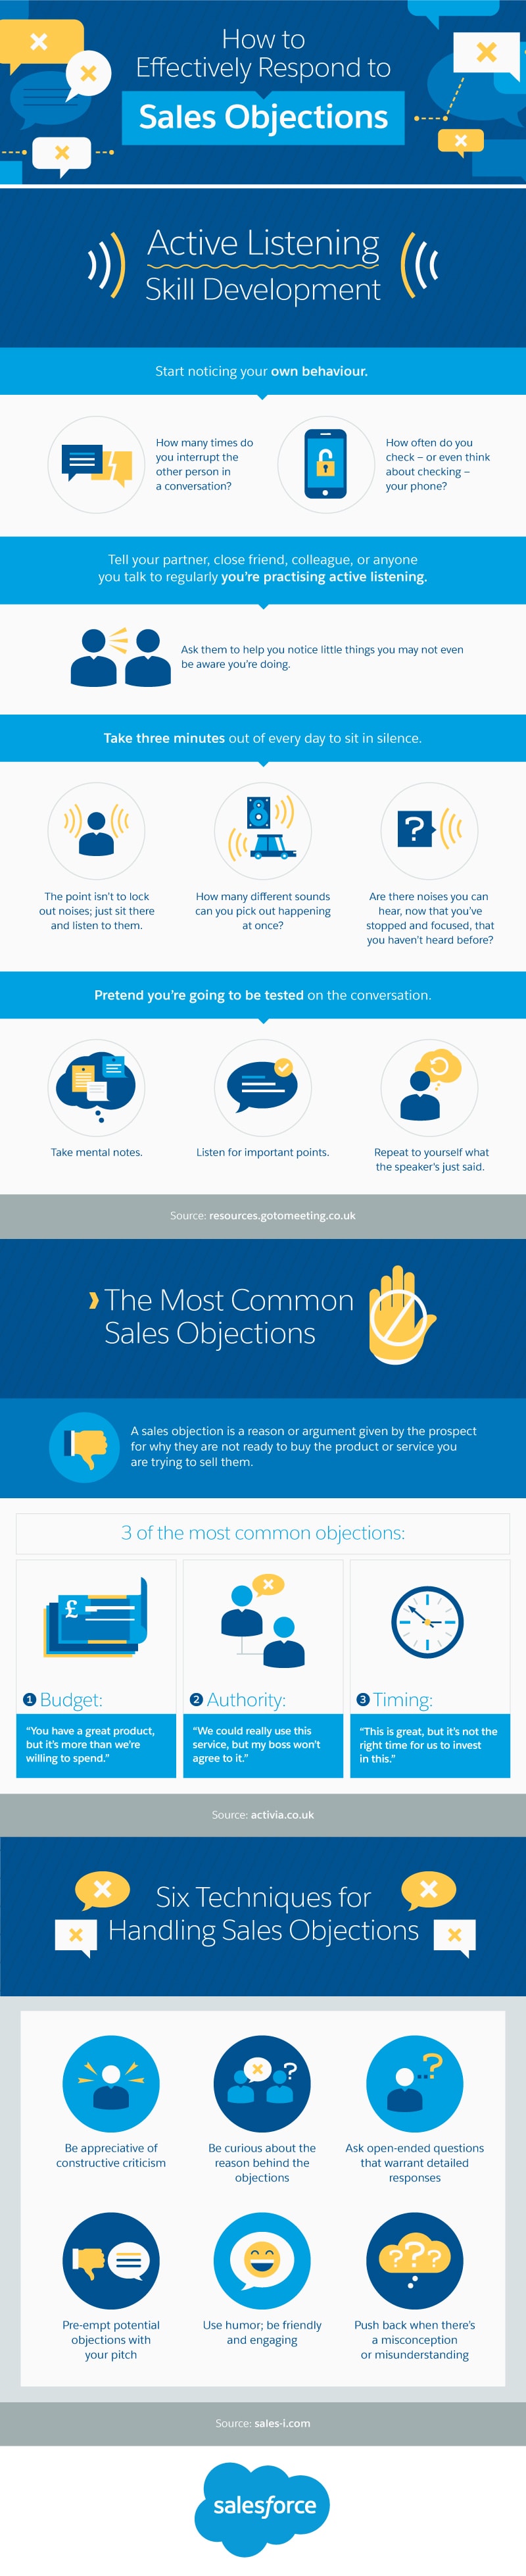  How to Effectively Respond to Sales Objections